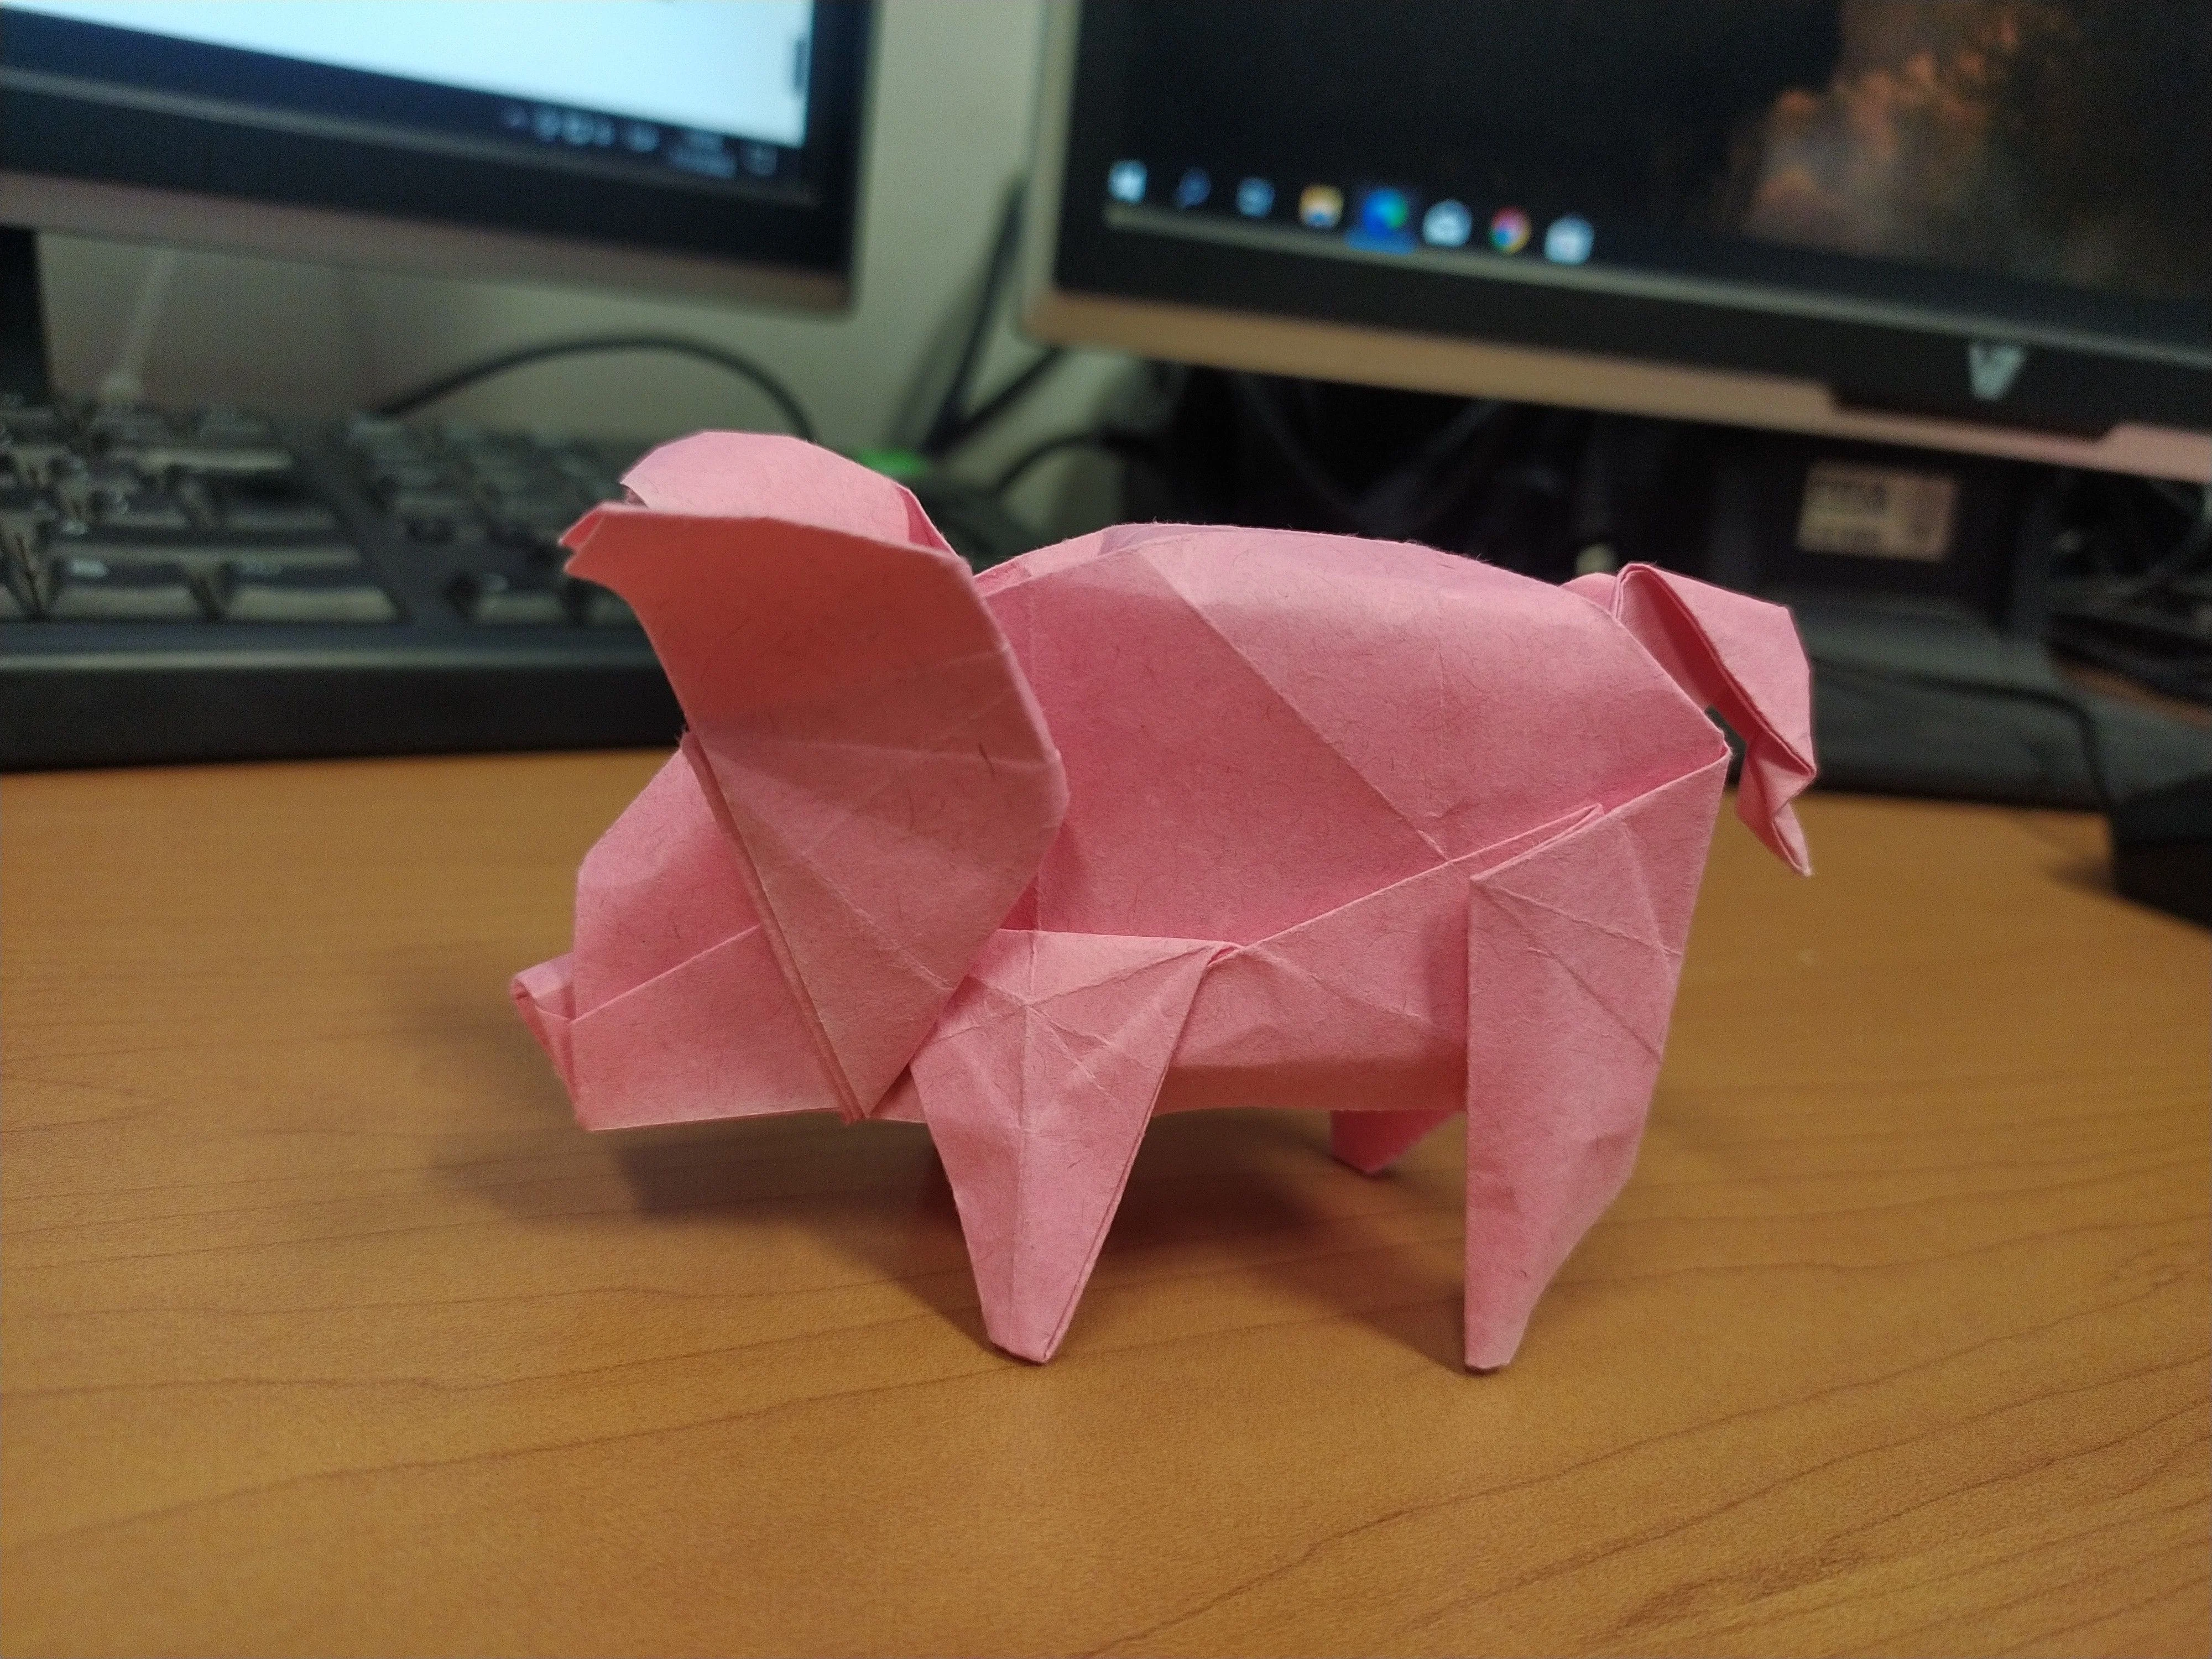 A Pig with quite big ears. Cute, simple and 3D.